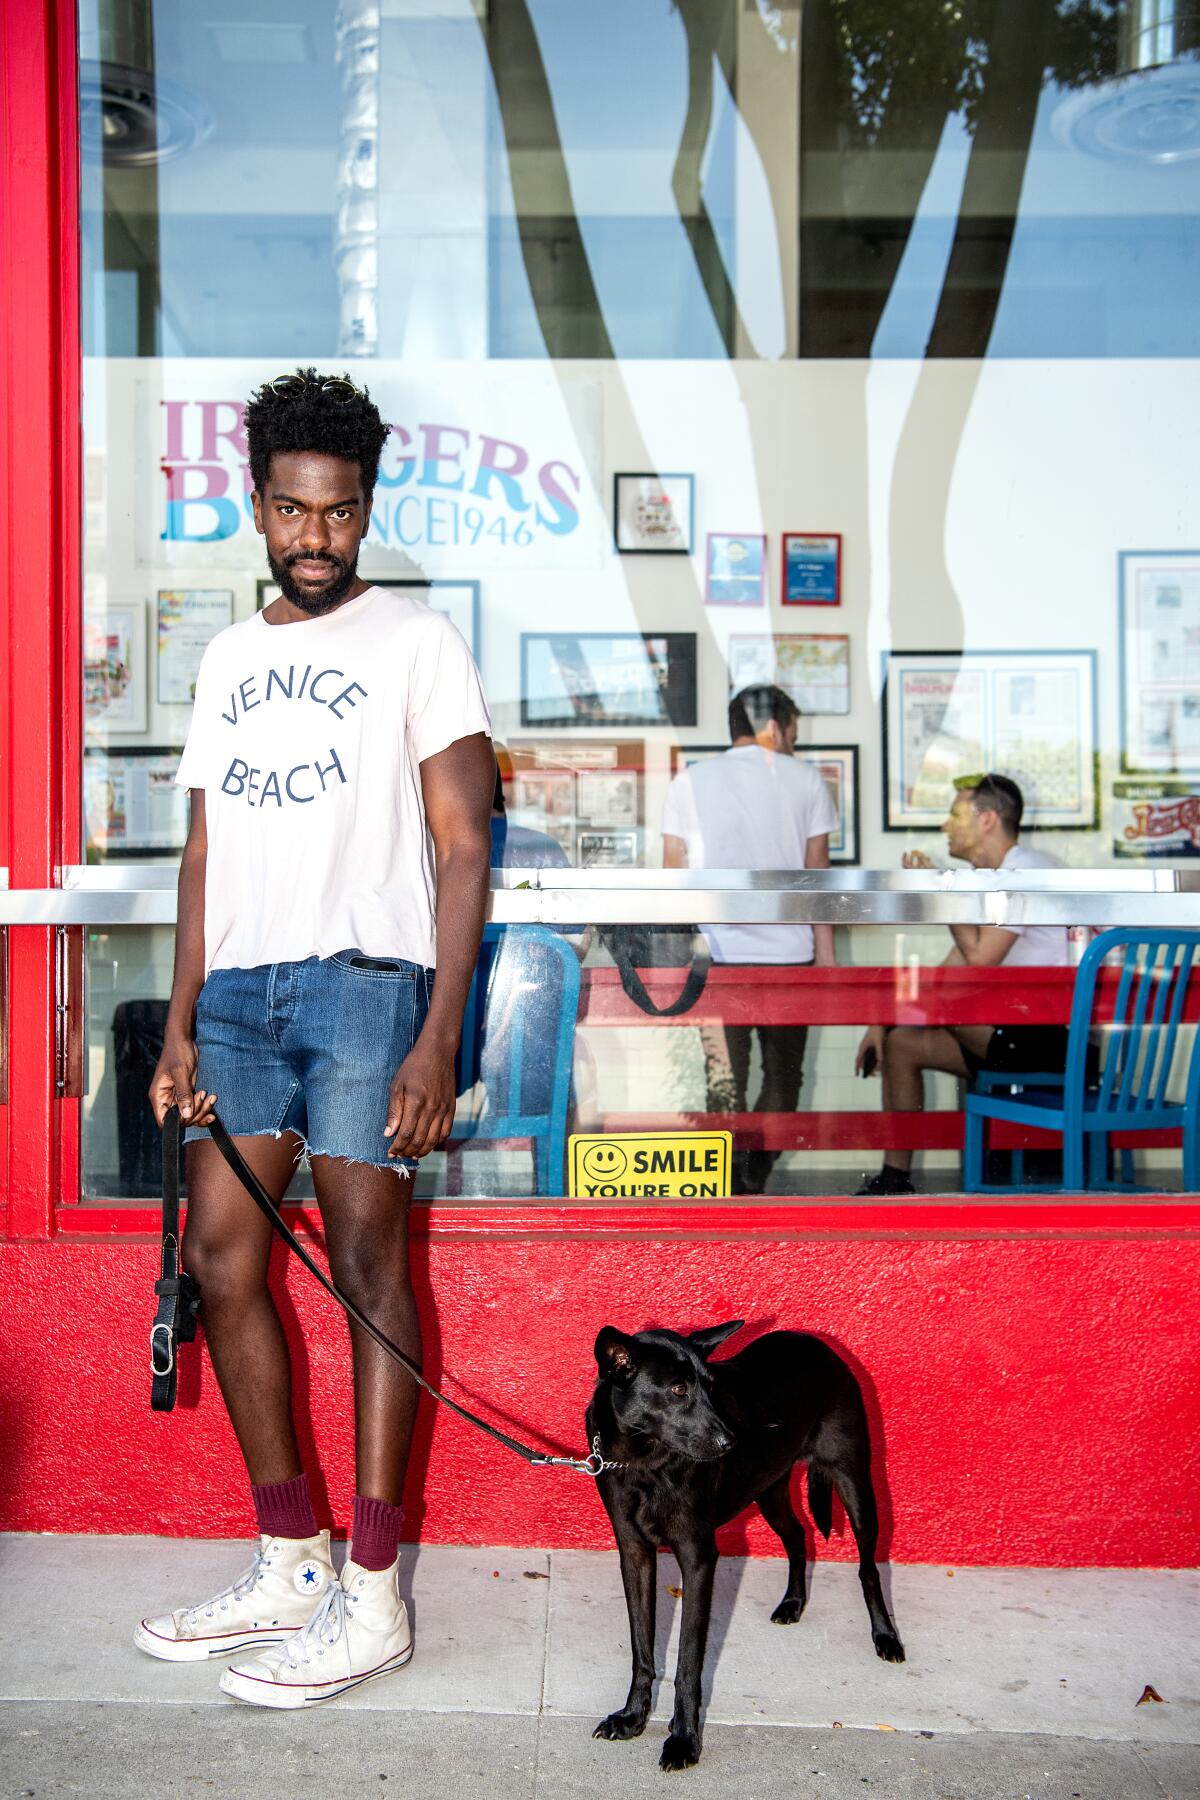 A photo of a man clad in denim shorts and a white shirt waiting in line outside of Irv's Burgers with his black dog, Mia.